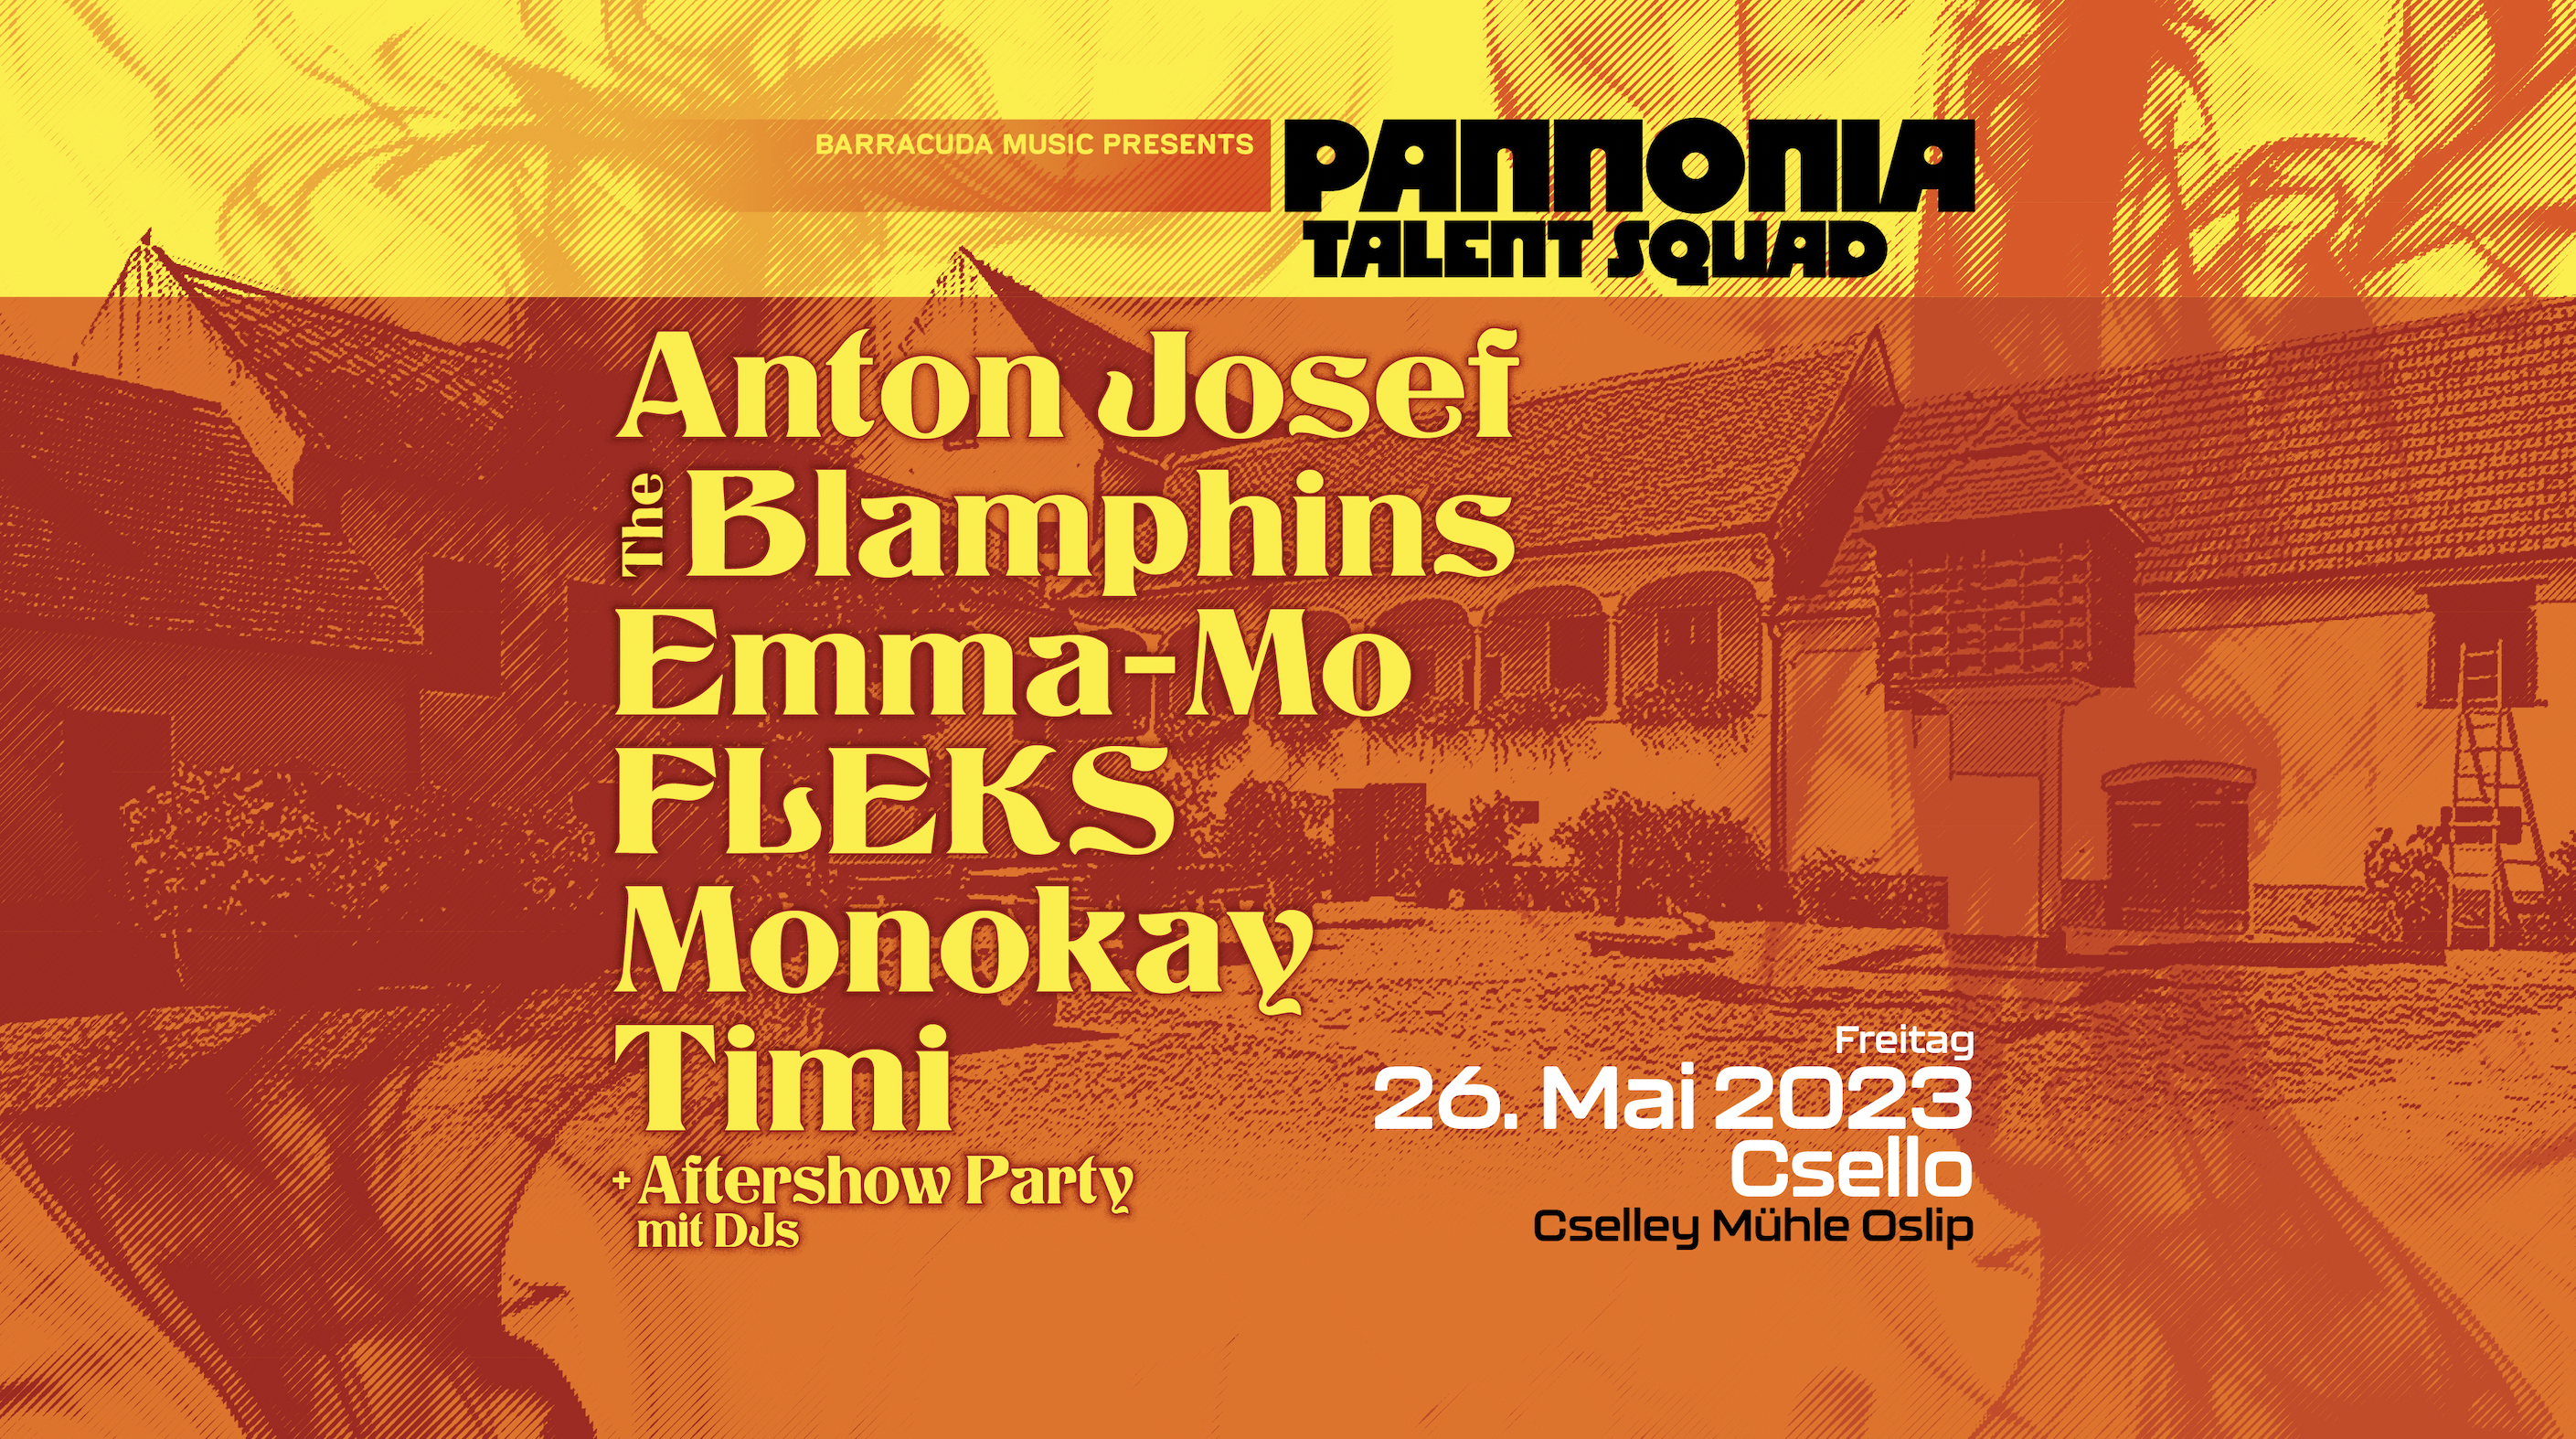 PANNONIA TALENT SQUAD am 26. May 2023 @ Cselley Mühle.